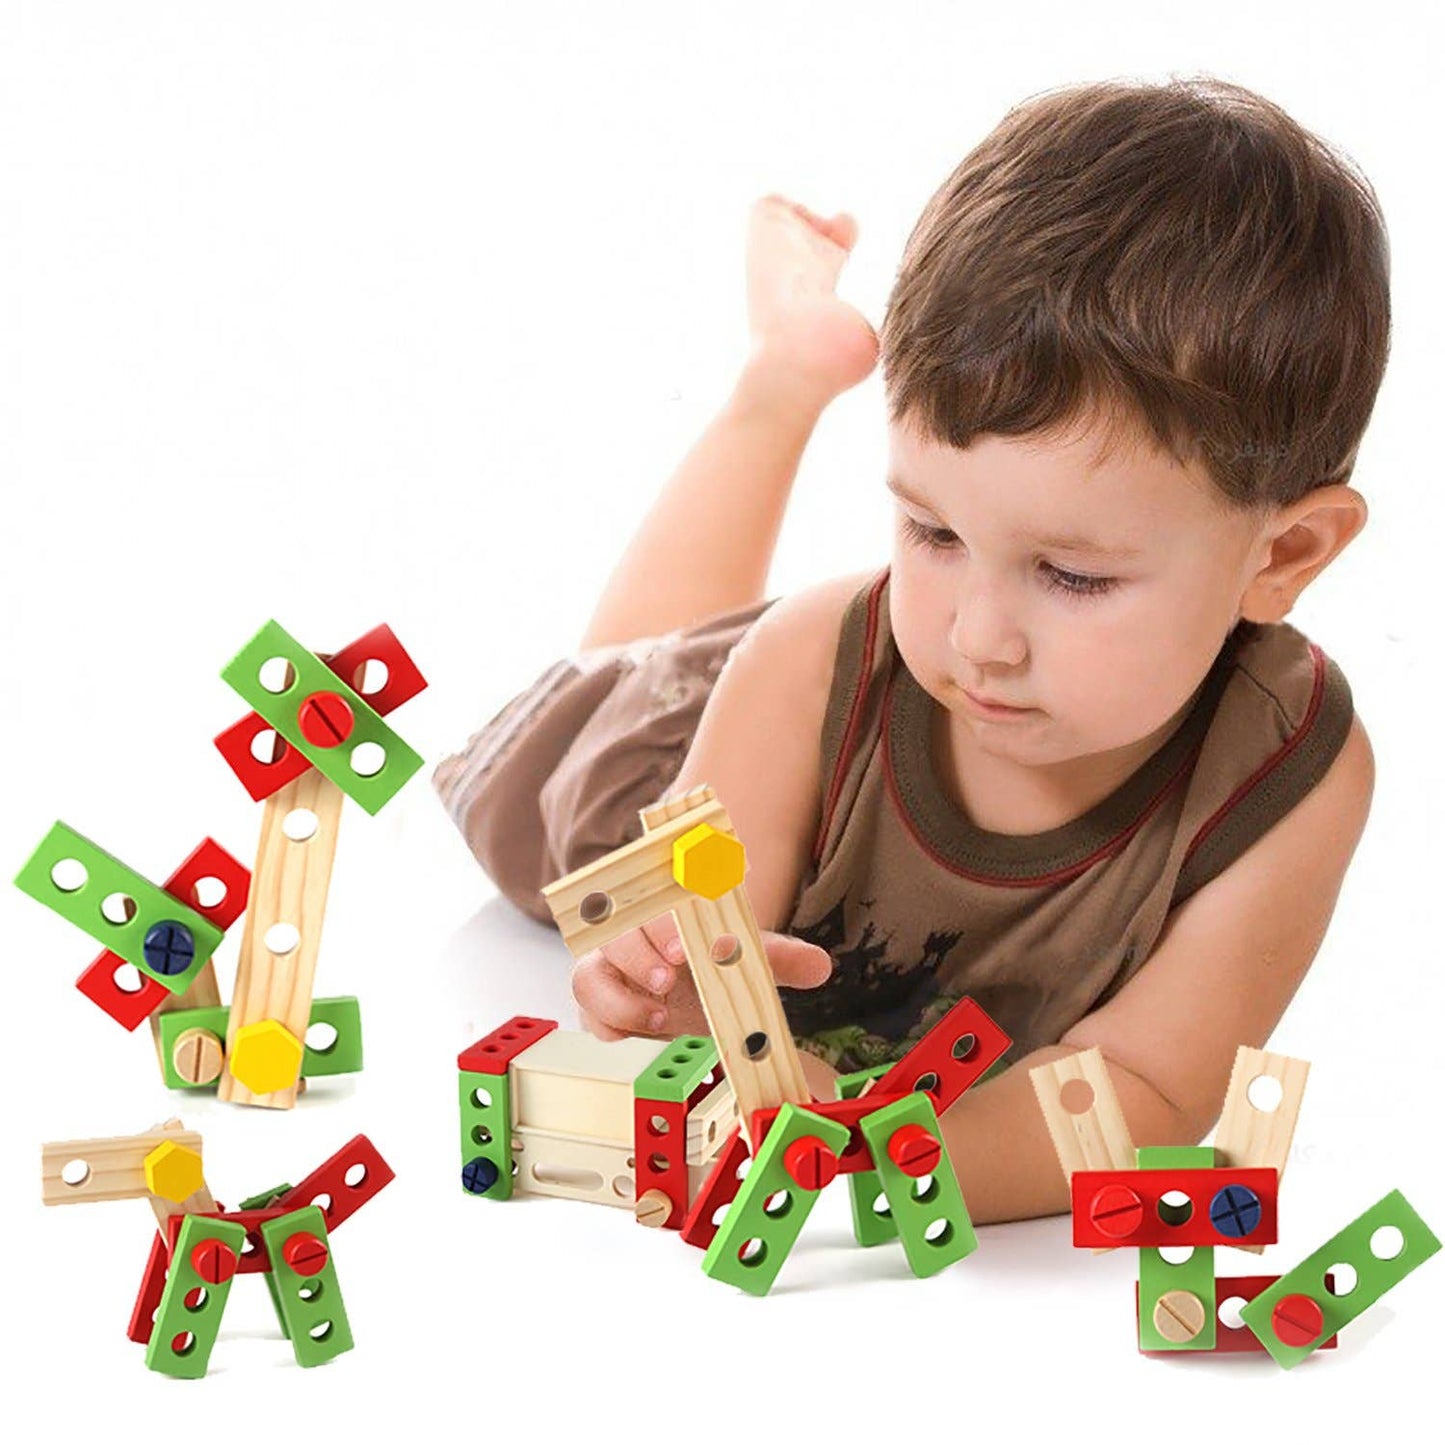 43 PCs Wooden Toy Tool Box Set for Kids